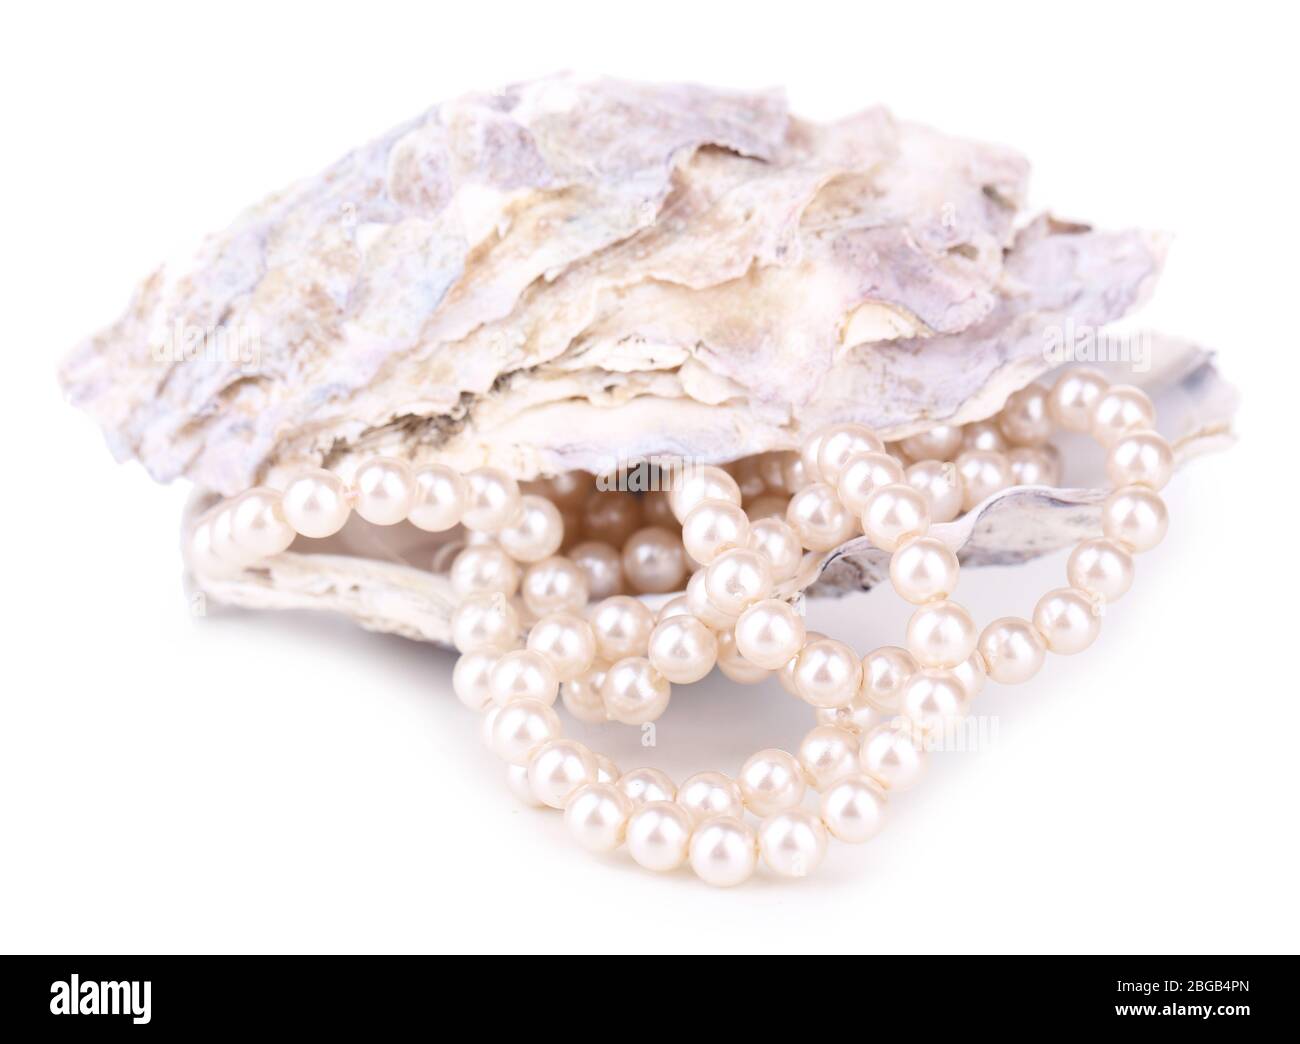 Shell with pearls, isolated on white Stock Photo